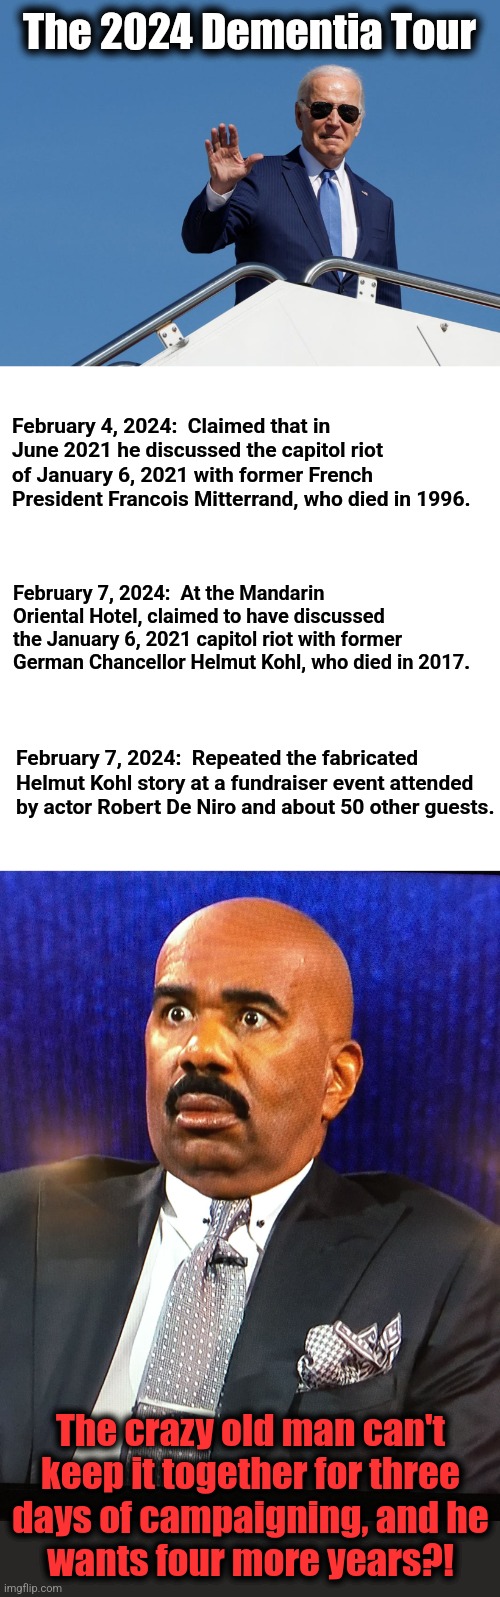 The 2024 Dementia Tour; February 4, 2024:  Claimed that in June 2021 he discussed the capitol riot of January 6, 2021 with former French President Francois Mitterrand, who died in 1996. February 7, 2024:  At the Mandarin Oriental Hotel, claimed to have discussed the January 6, 2021 capitol riot with former German Chancellor Helmut Kohl, who died in 2017. February 7, 2024:  Repeated the fabricated Helmut Kohl story at a fundraiser event attended by actor Robert De Niro and about 50 other guests. The crazy old man can't
keep it together for three
days of campaigning, and he
wants four more years?! | image tagged in steve harvey wtf face,joe biden,dementia,democrats,election 2024,senile creep | made w/ Imgflip meme maker